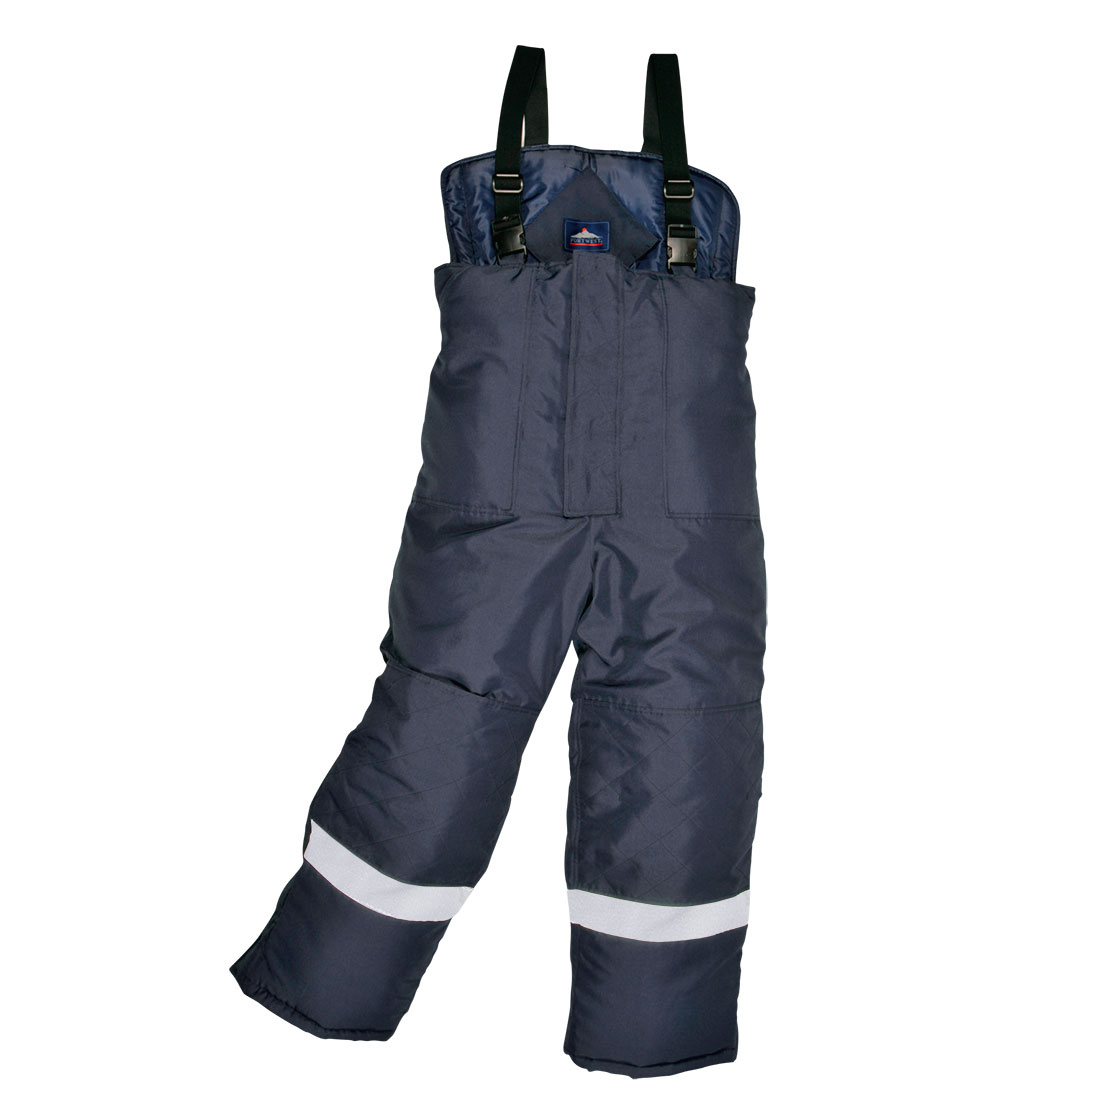 CS11 Portwest® Navy Blue ColdStore Insulated Winter Pants with Reflective Tape